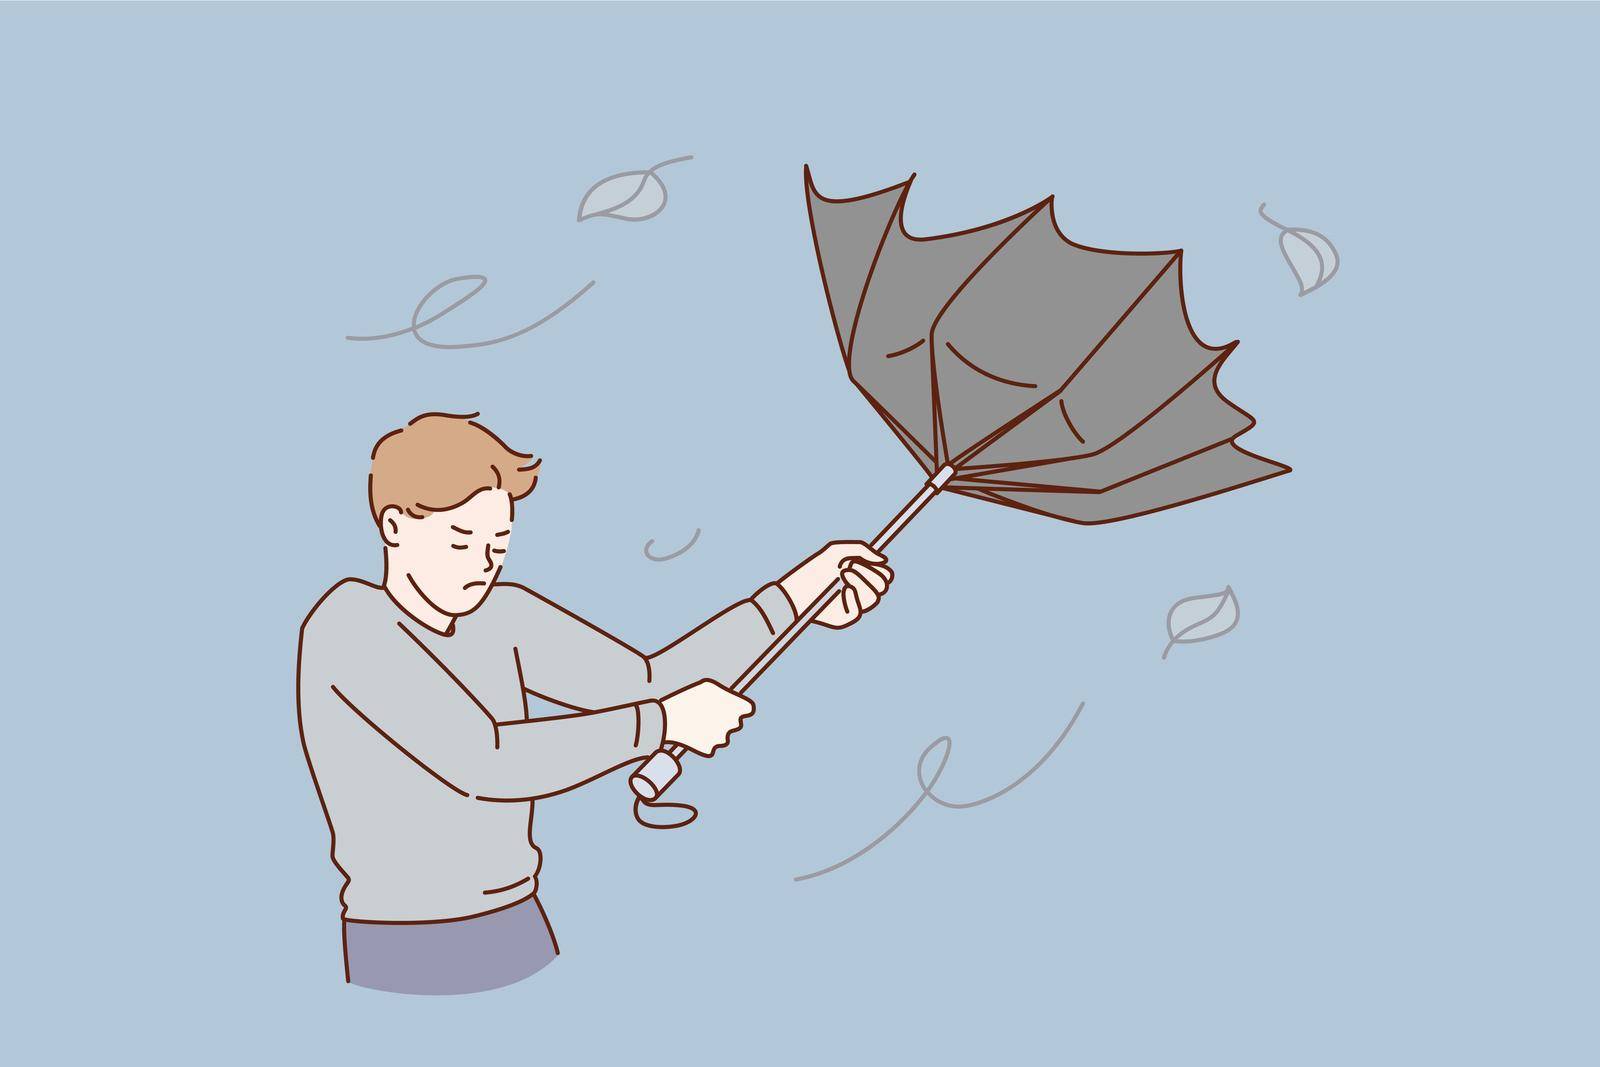 Bad weather and storm concept. Young stressed man cartoon character standing trying to catch flying umbrella from rain and wind vector illustration